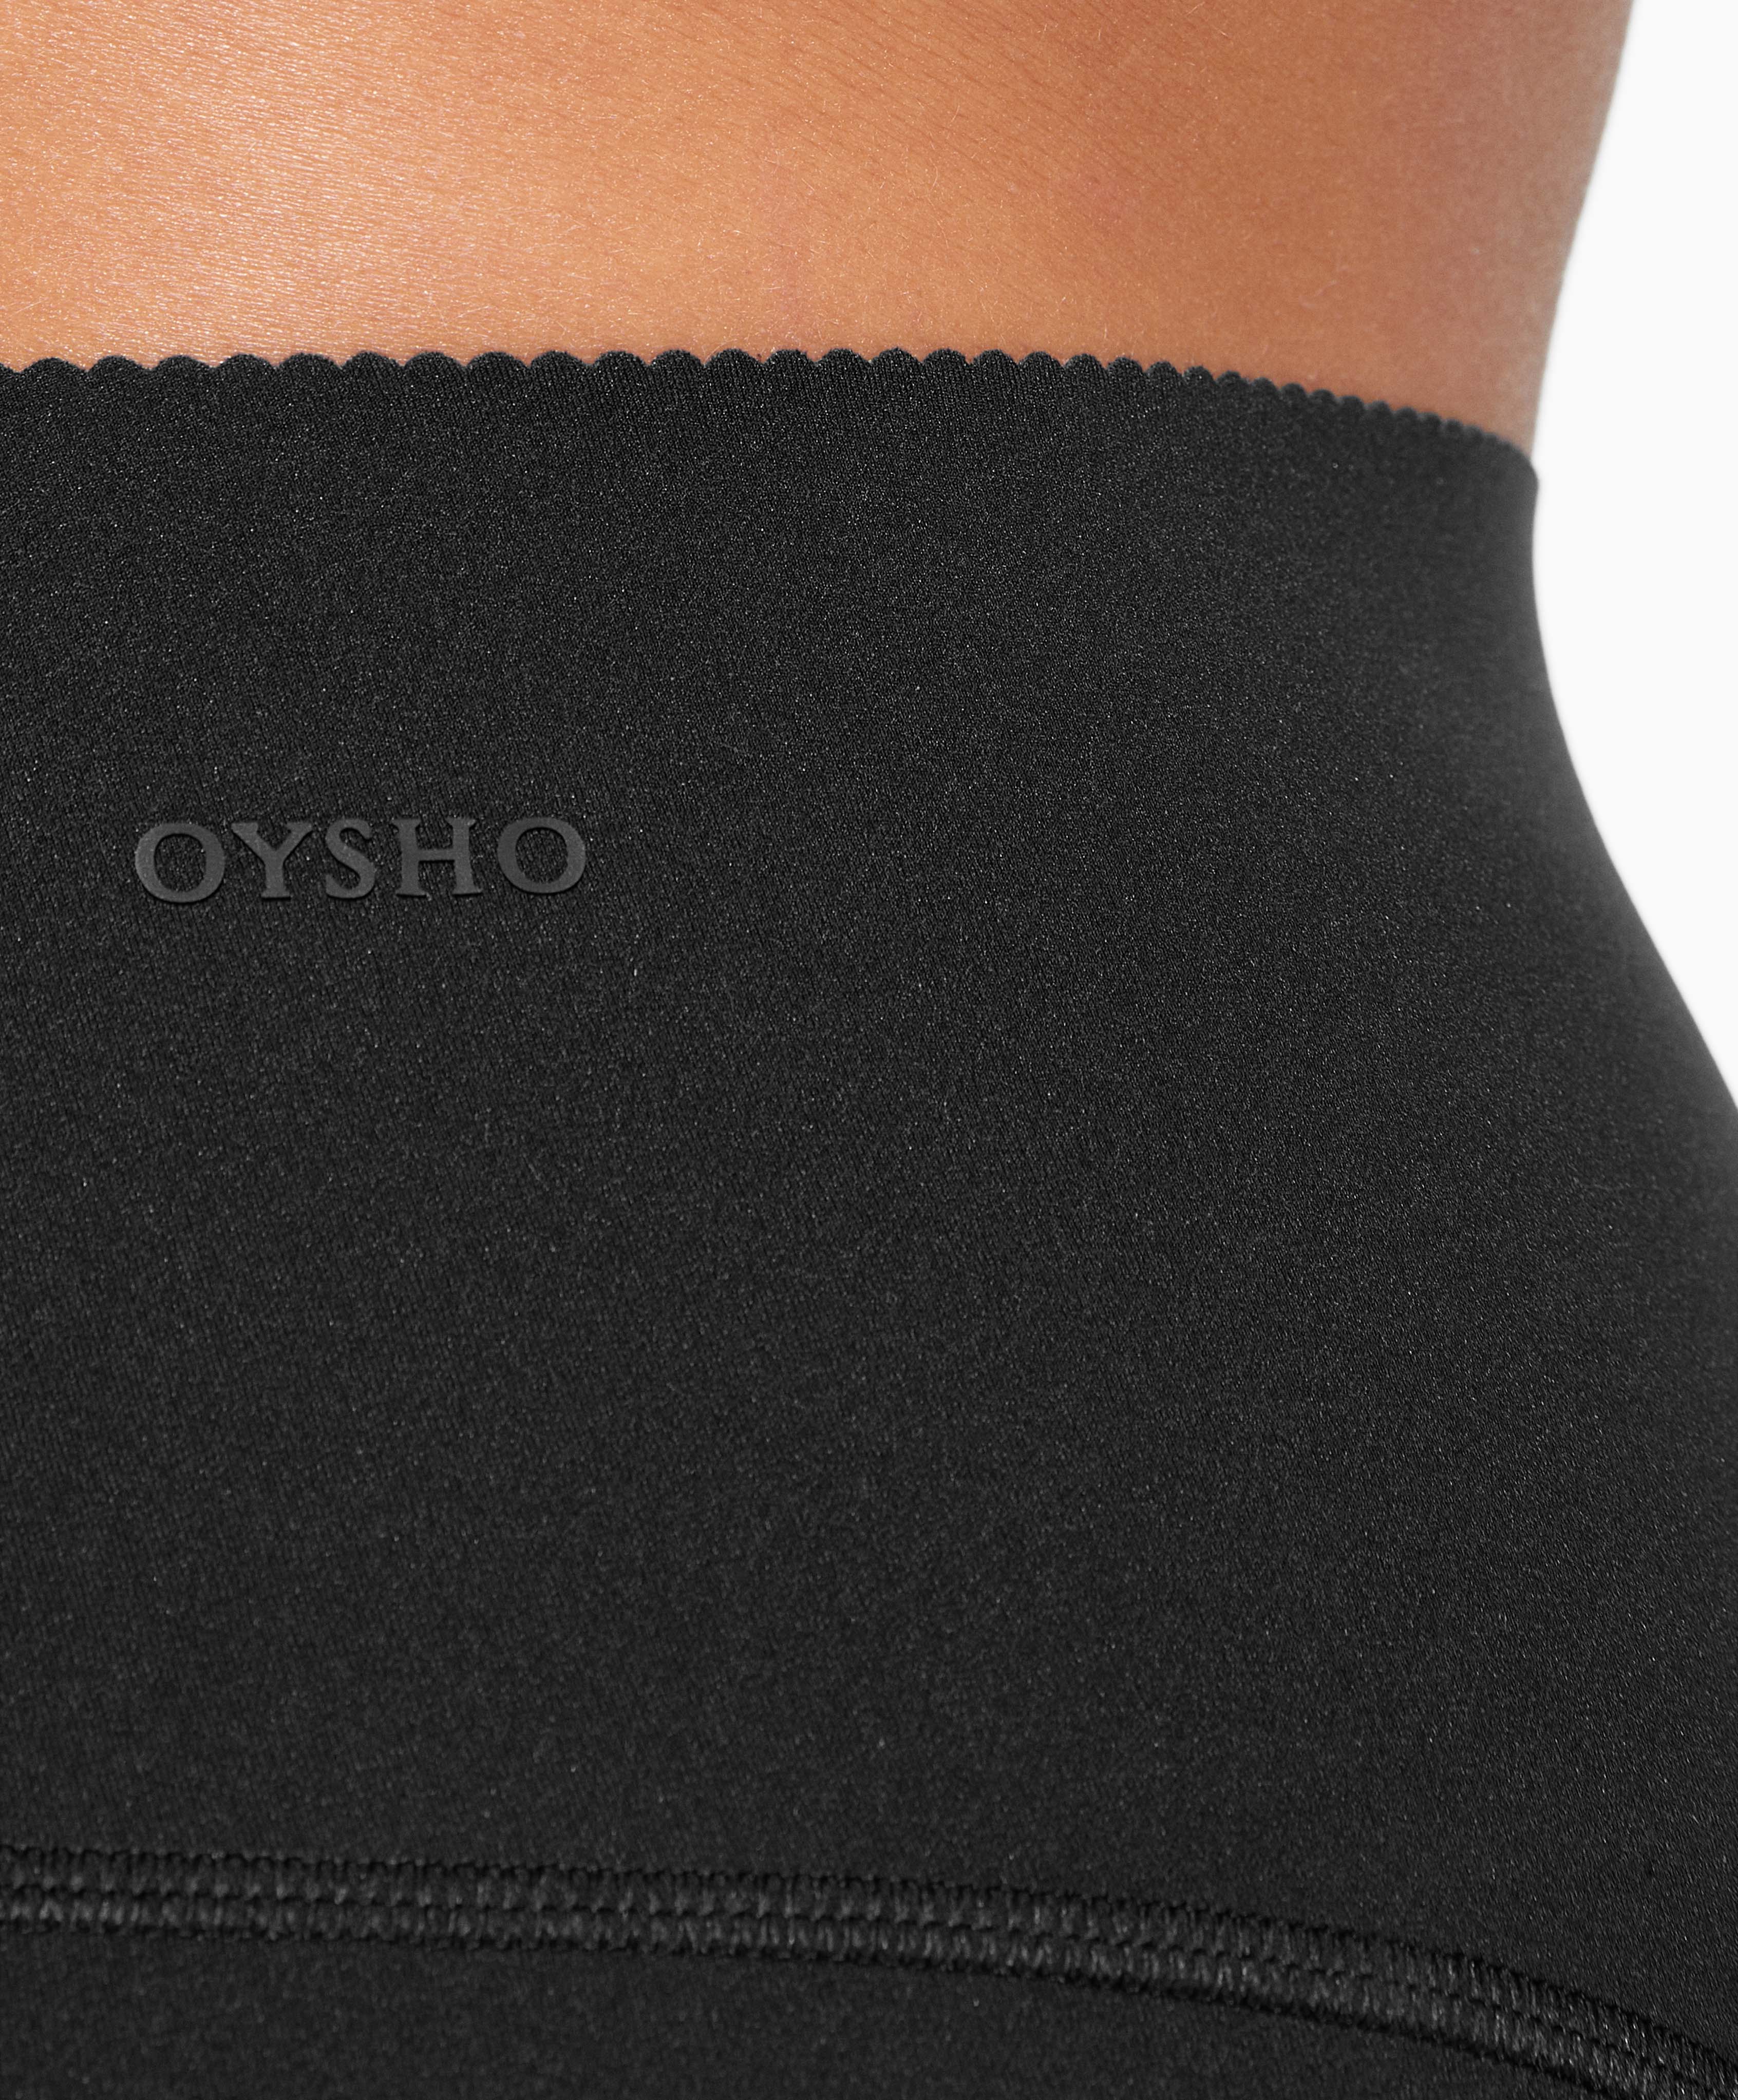 Microperforated 25cm compressive cycle shorts